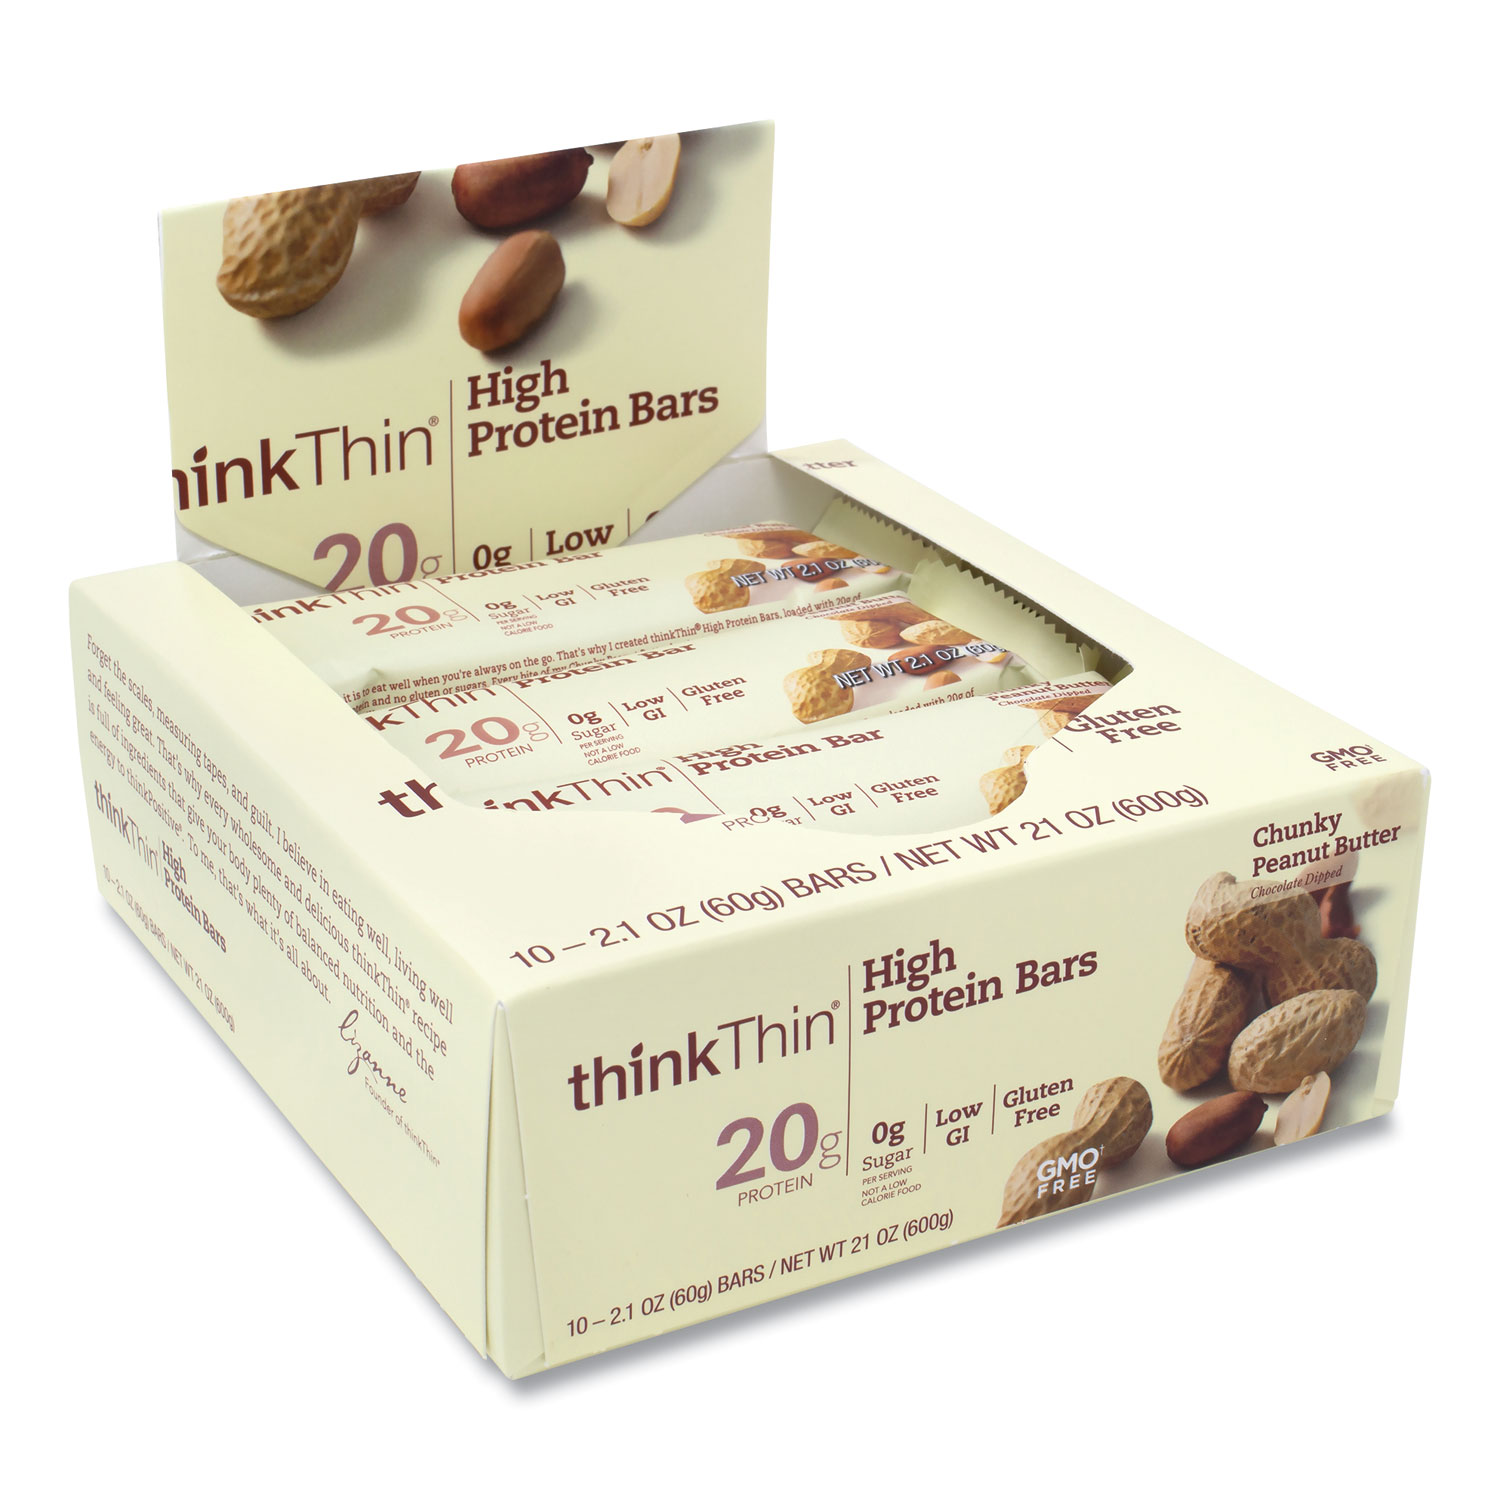  thinkThin 70148 High Protein Bars, Chunky Peanut Butter, 2.1 oz Bar, 10 Bars/Carton, Free Delivery in 1-4 Business Days (GRR20902477) 